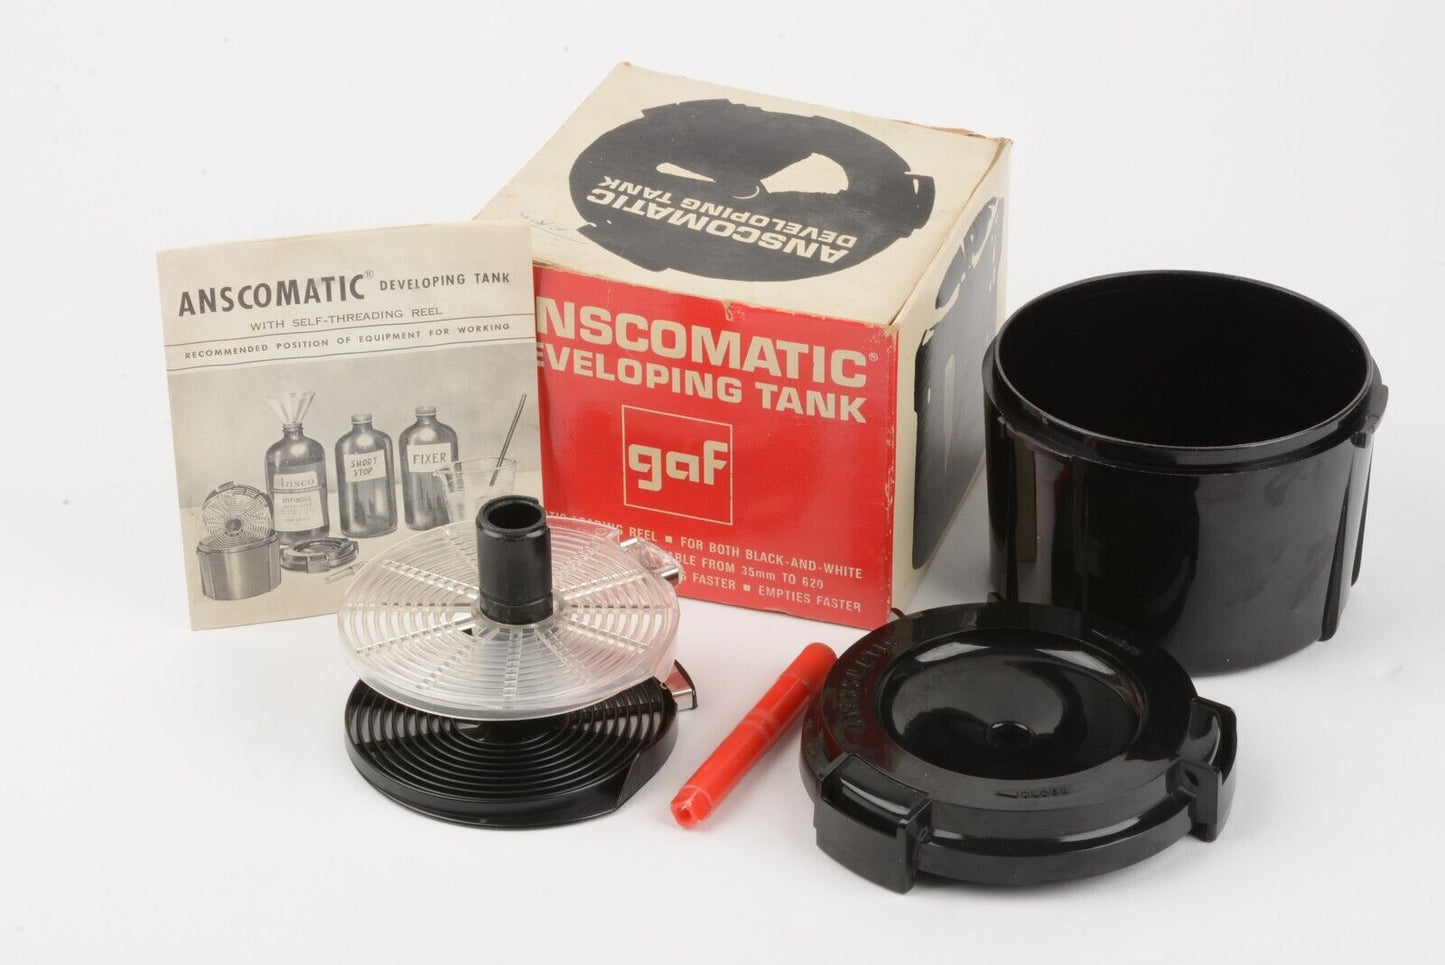 EXC++ ANSCOMATIC 35mm/120 F-698 FILM DEVELOPING TANK, REEL